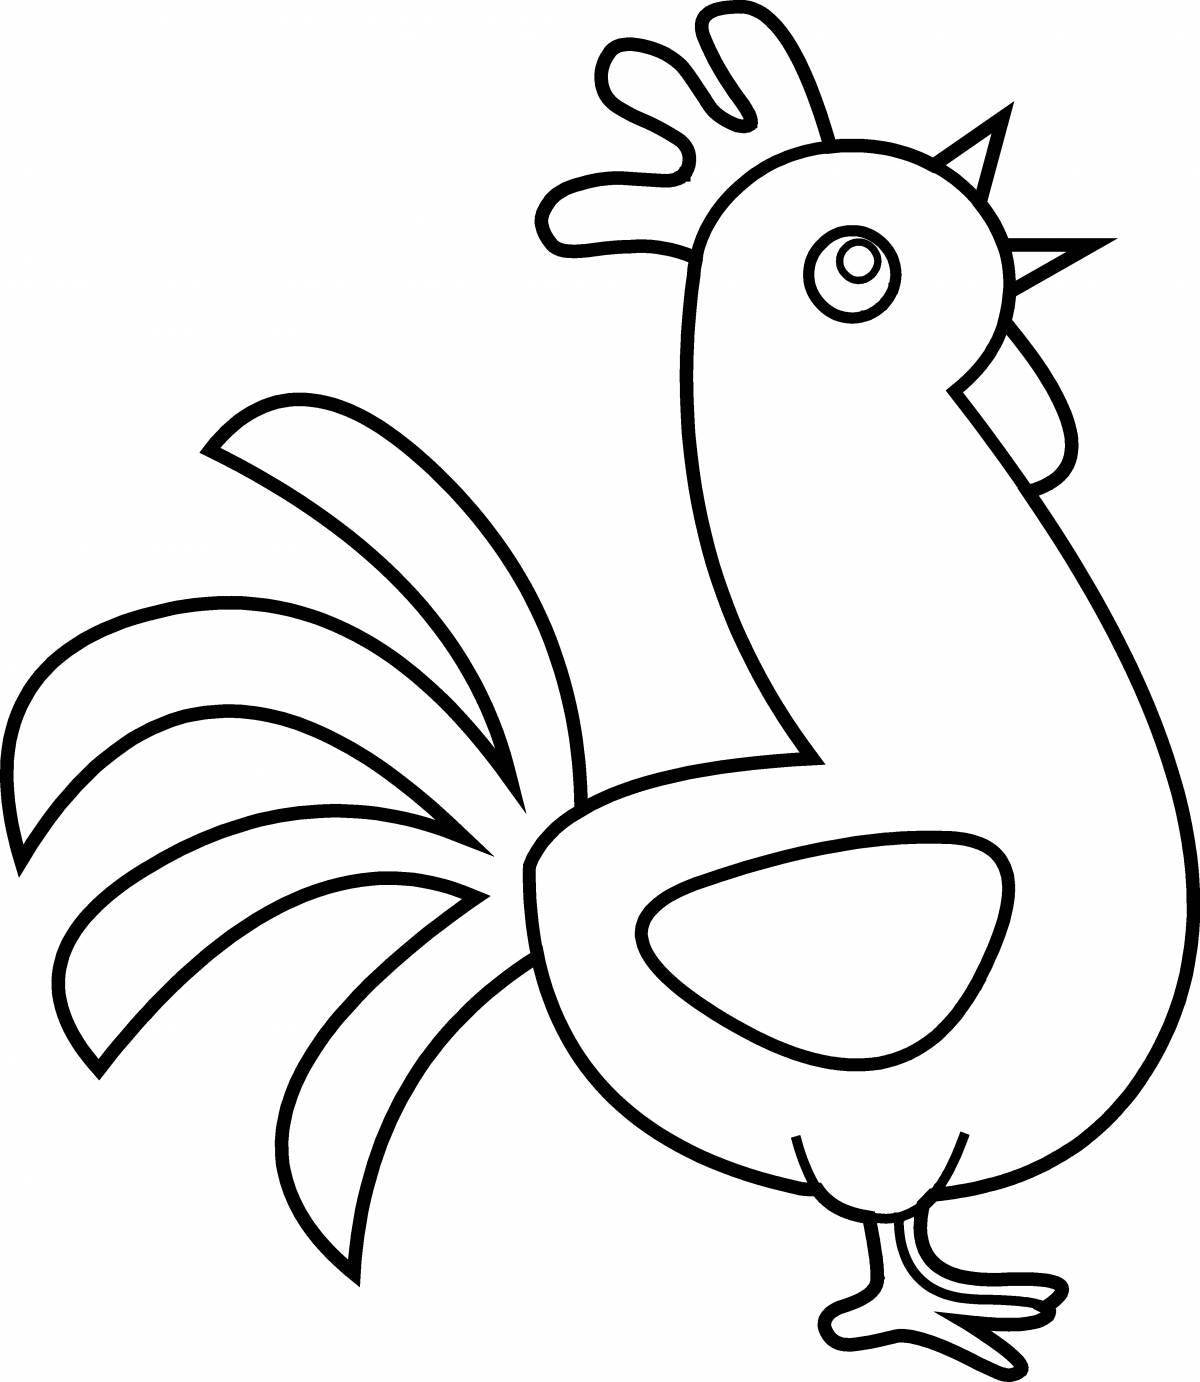 Children's cock coloring page